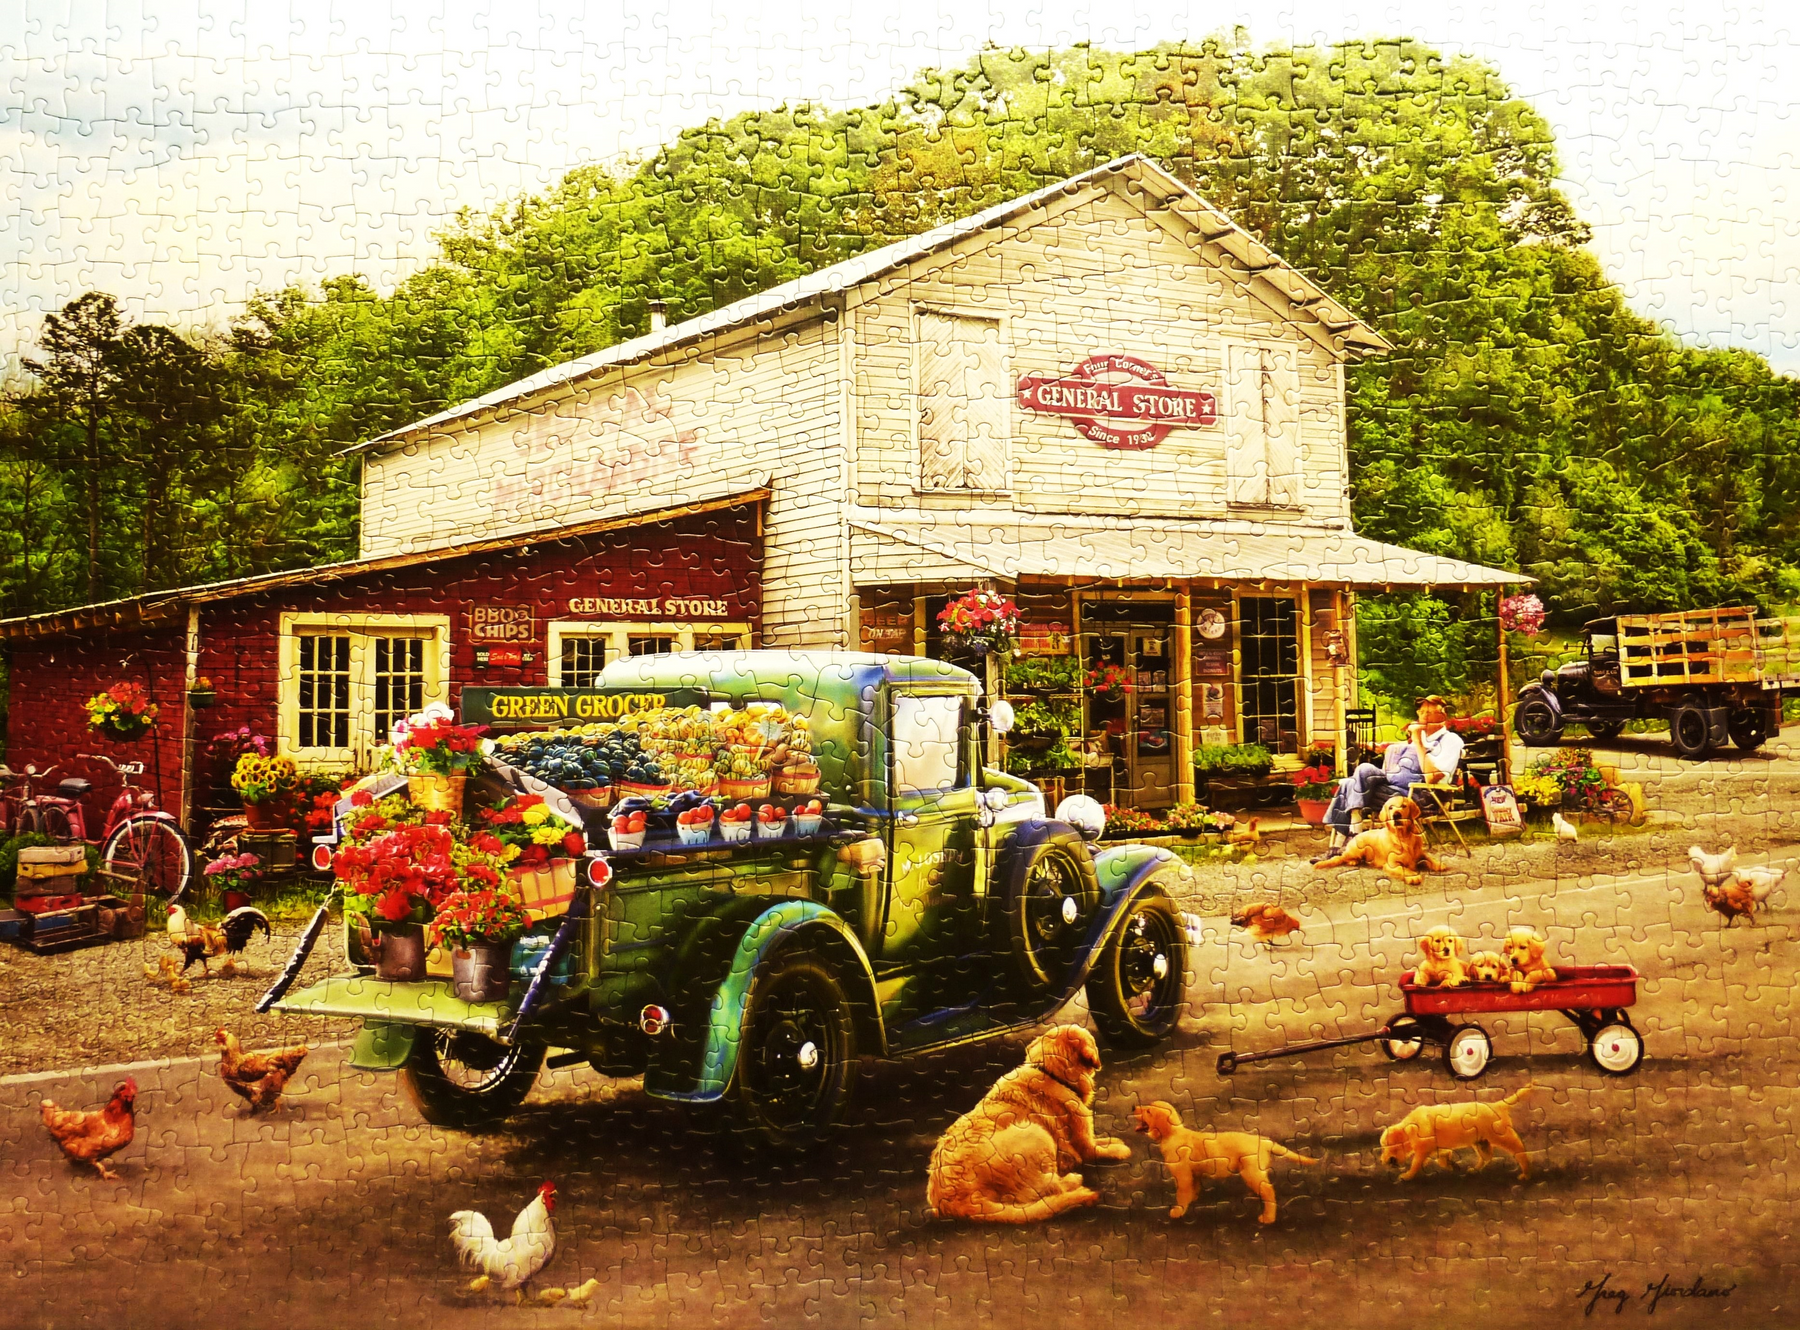 Rural Delight: Enjoy Fresh Groceries at the General Store!